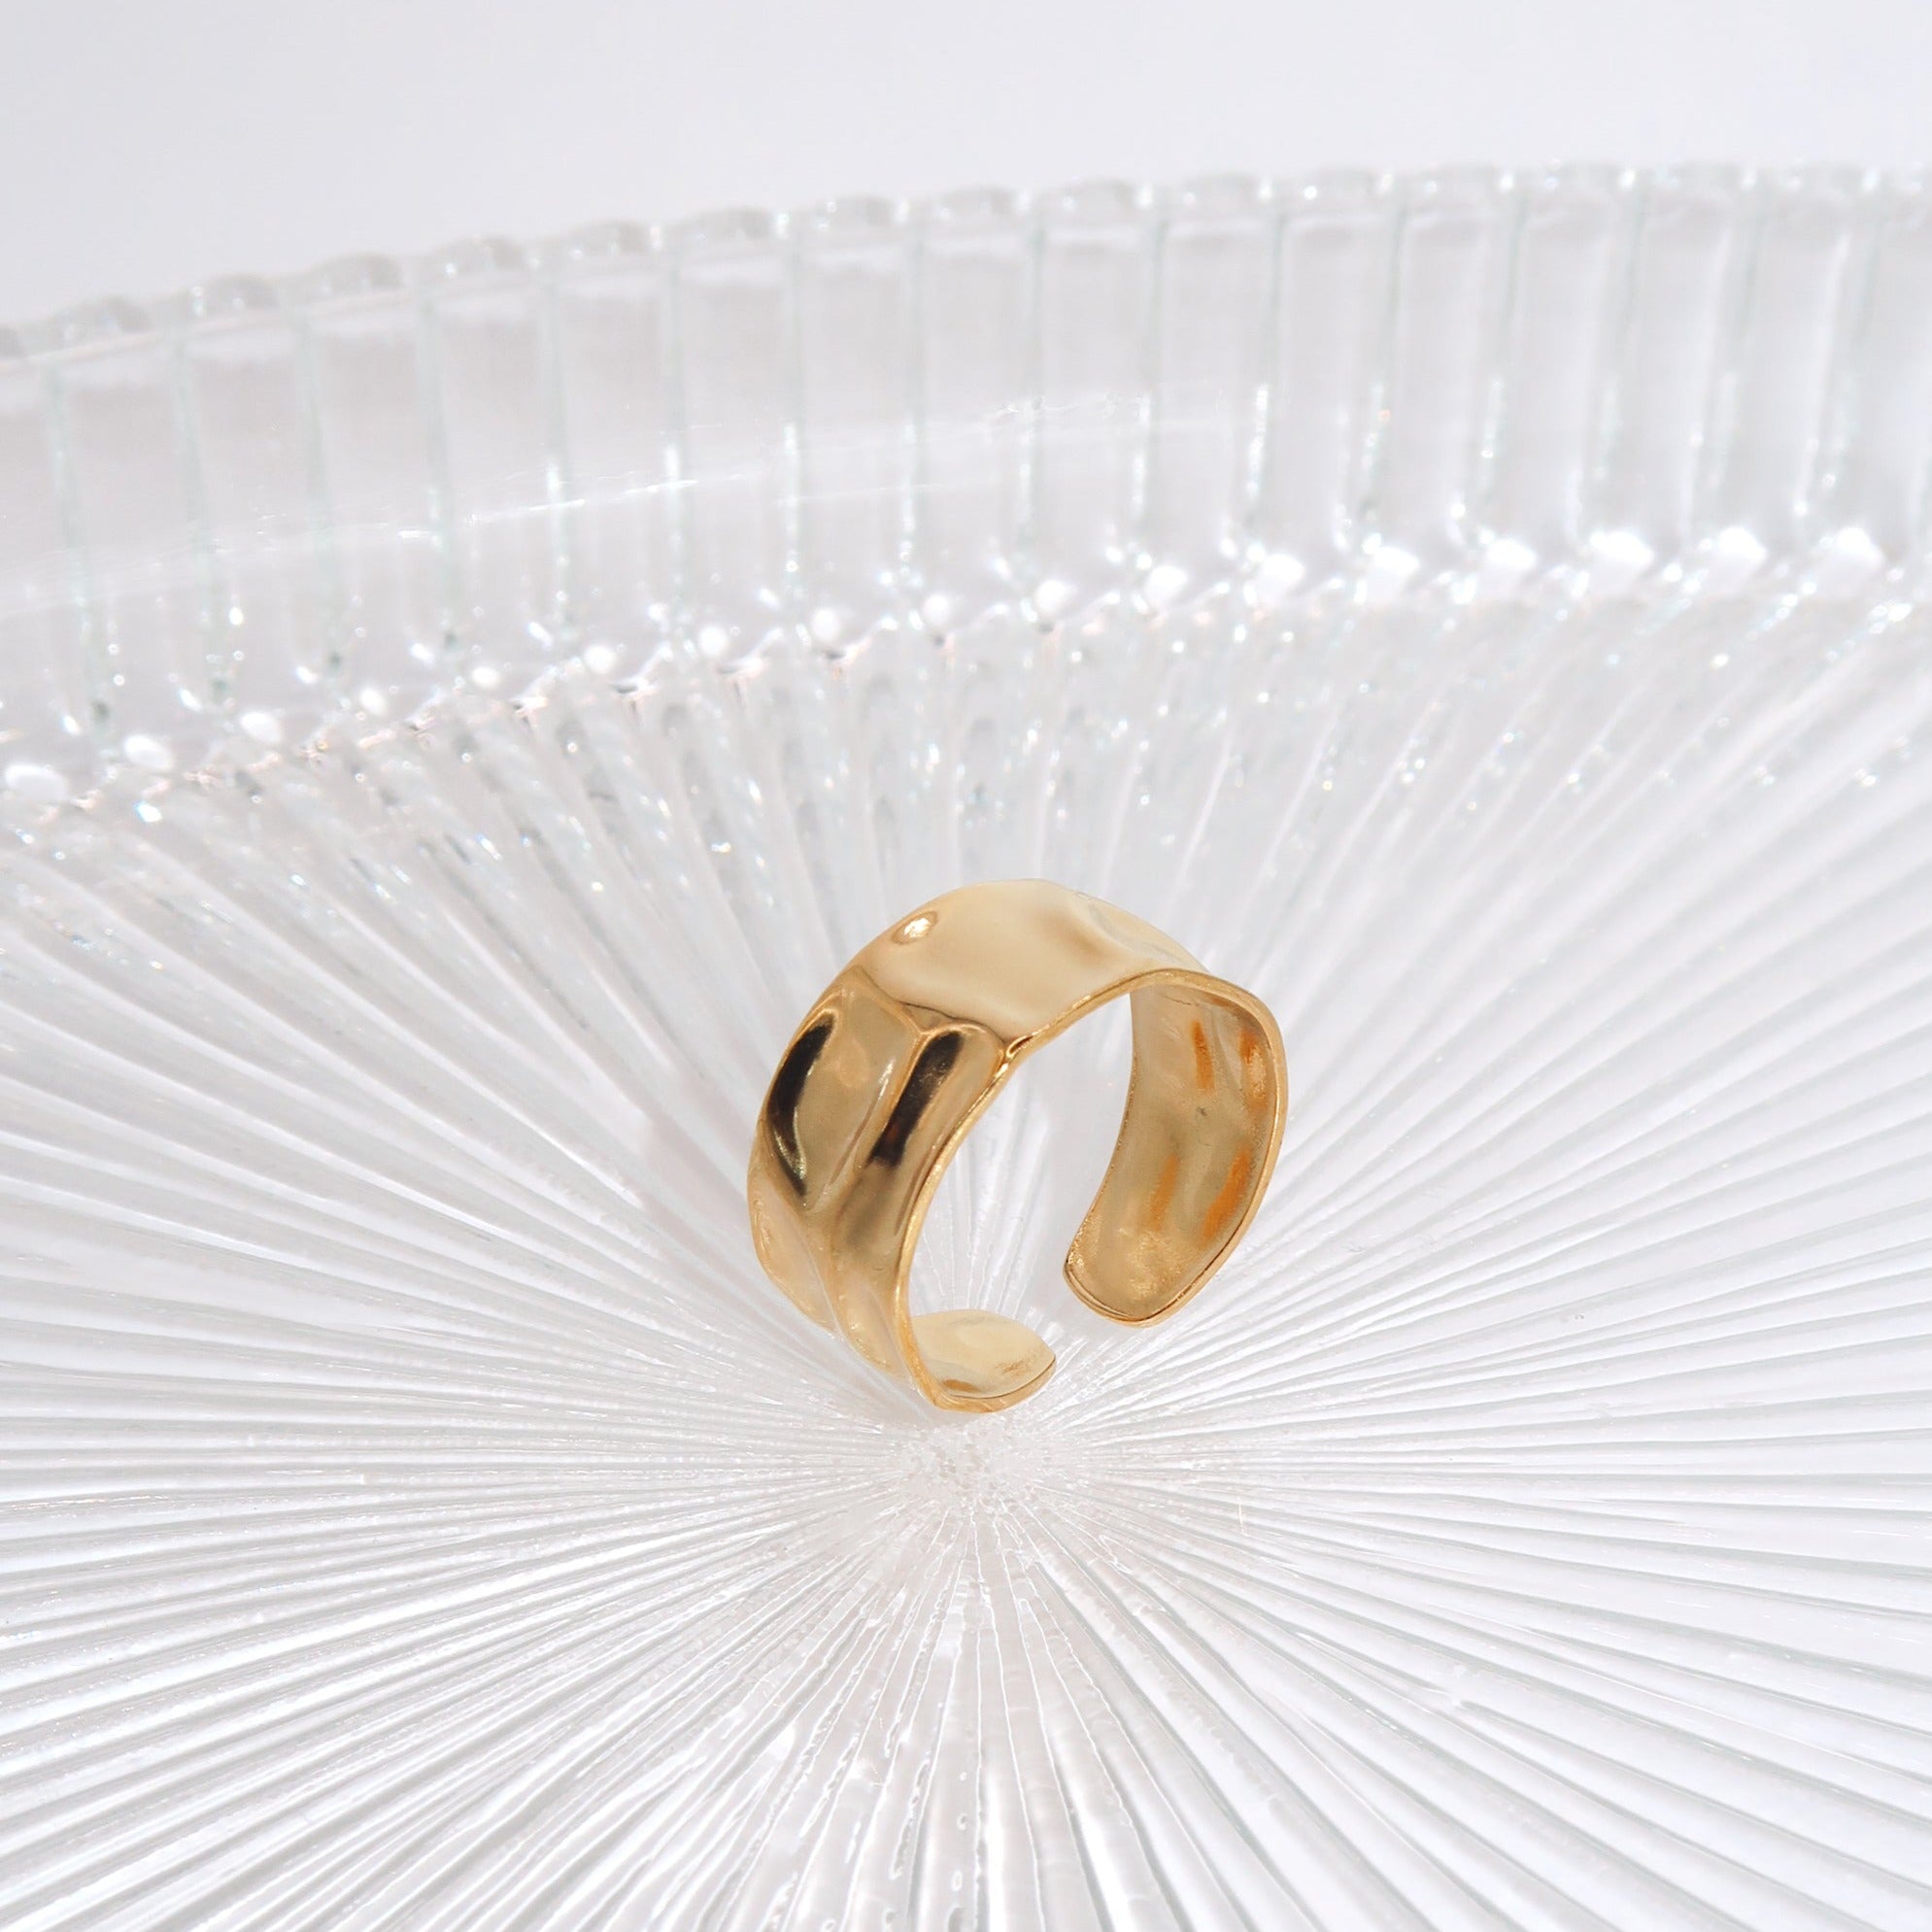 ALIYAH - 18K PVD Gold Plated Minimal Adjustable Ring with Hammered Detail - Mixed Metals